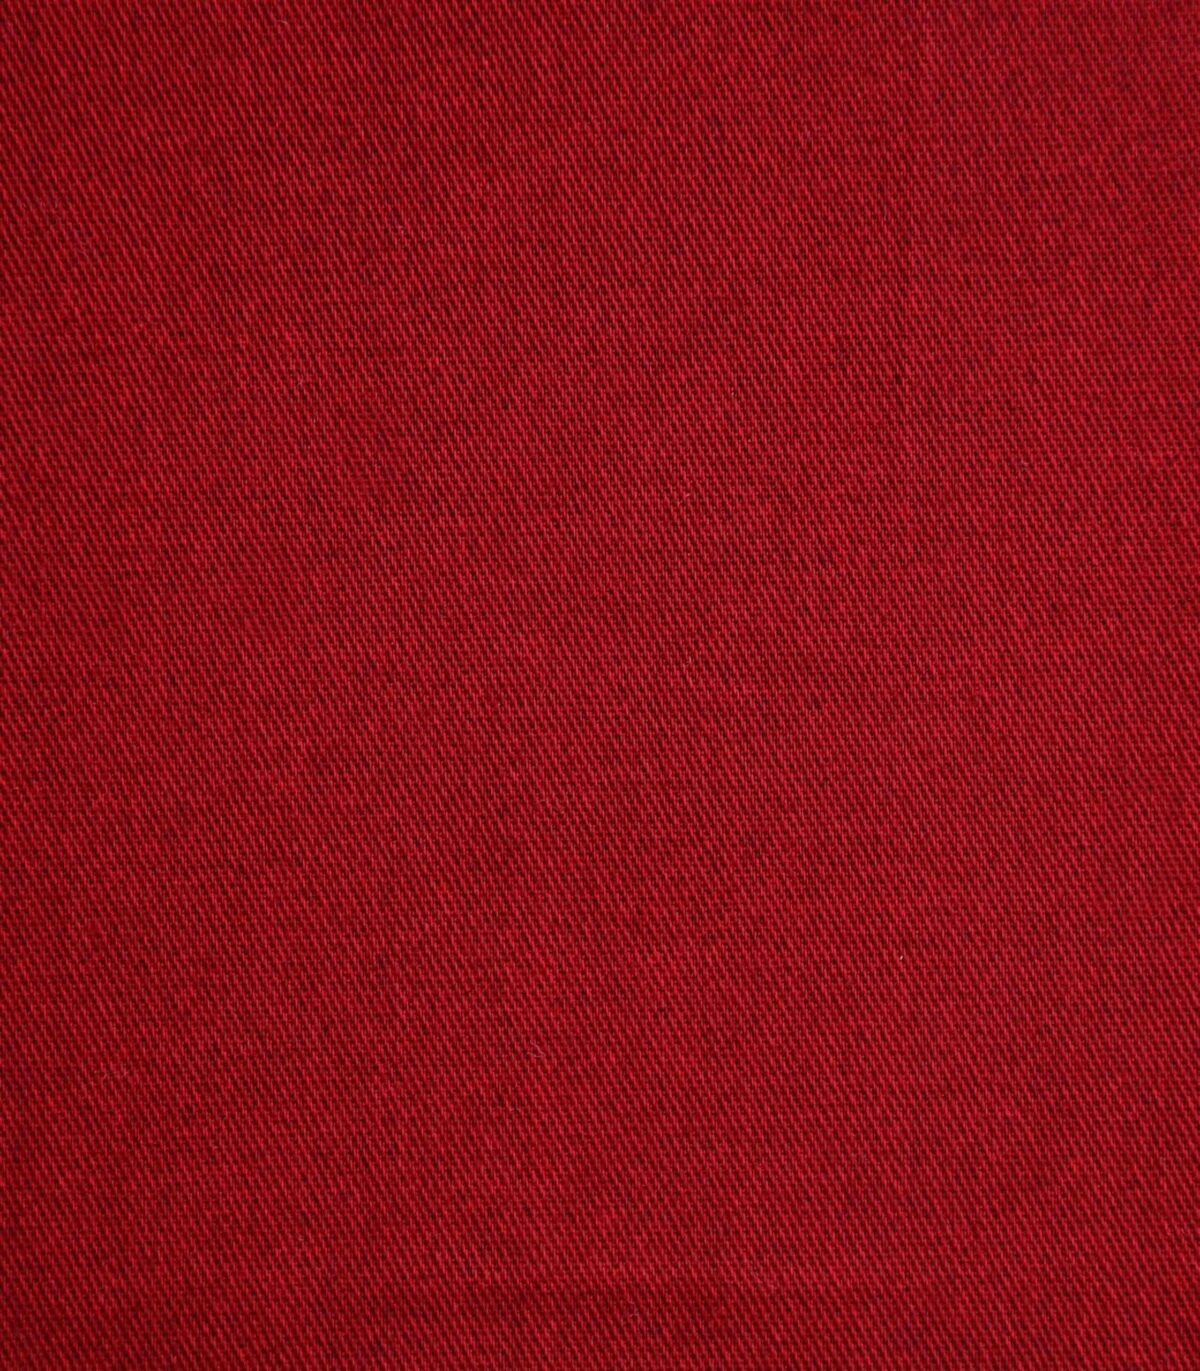 Cotton Lycra Maroon Dyed Woven Fabric